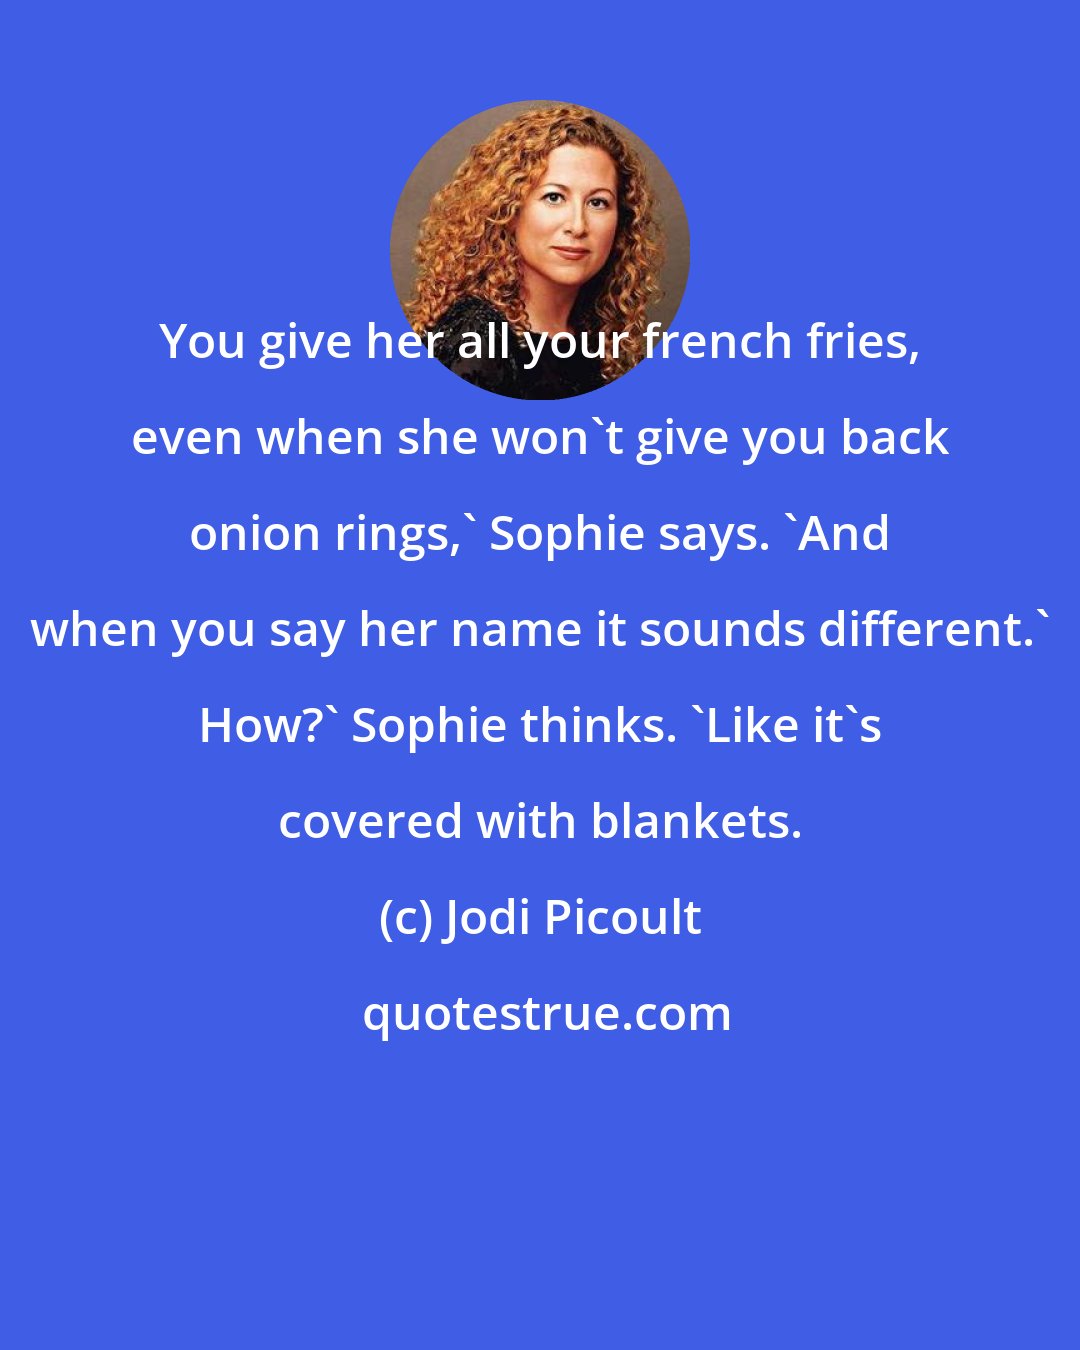 Jodi Picoult: You give her all your french fries, even when she won't give you back onion rings,' Sophie says. 'And when you say her name it sounds different.' How?' Sophie thinks. 'Like it's covered with blankets.